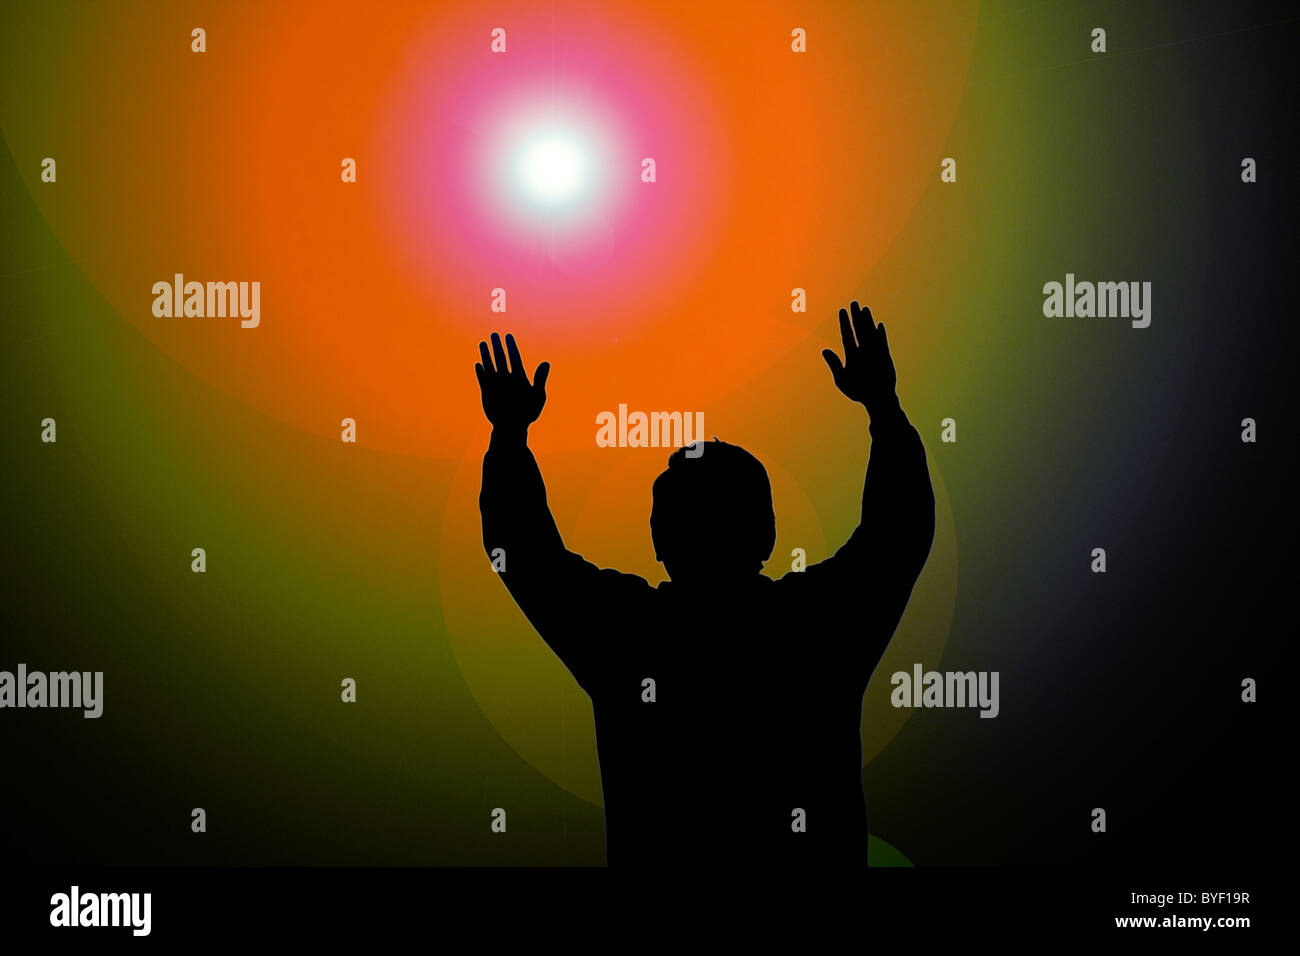 Colorful sun beam on man with hands up Stock Photo